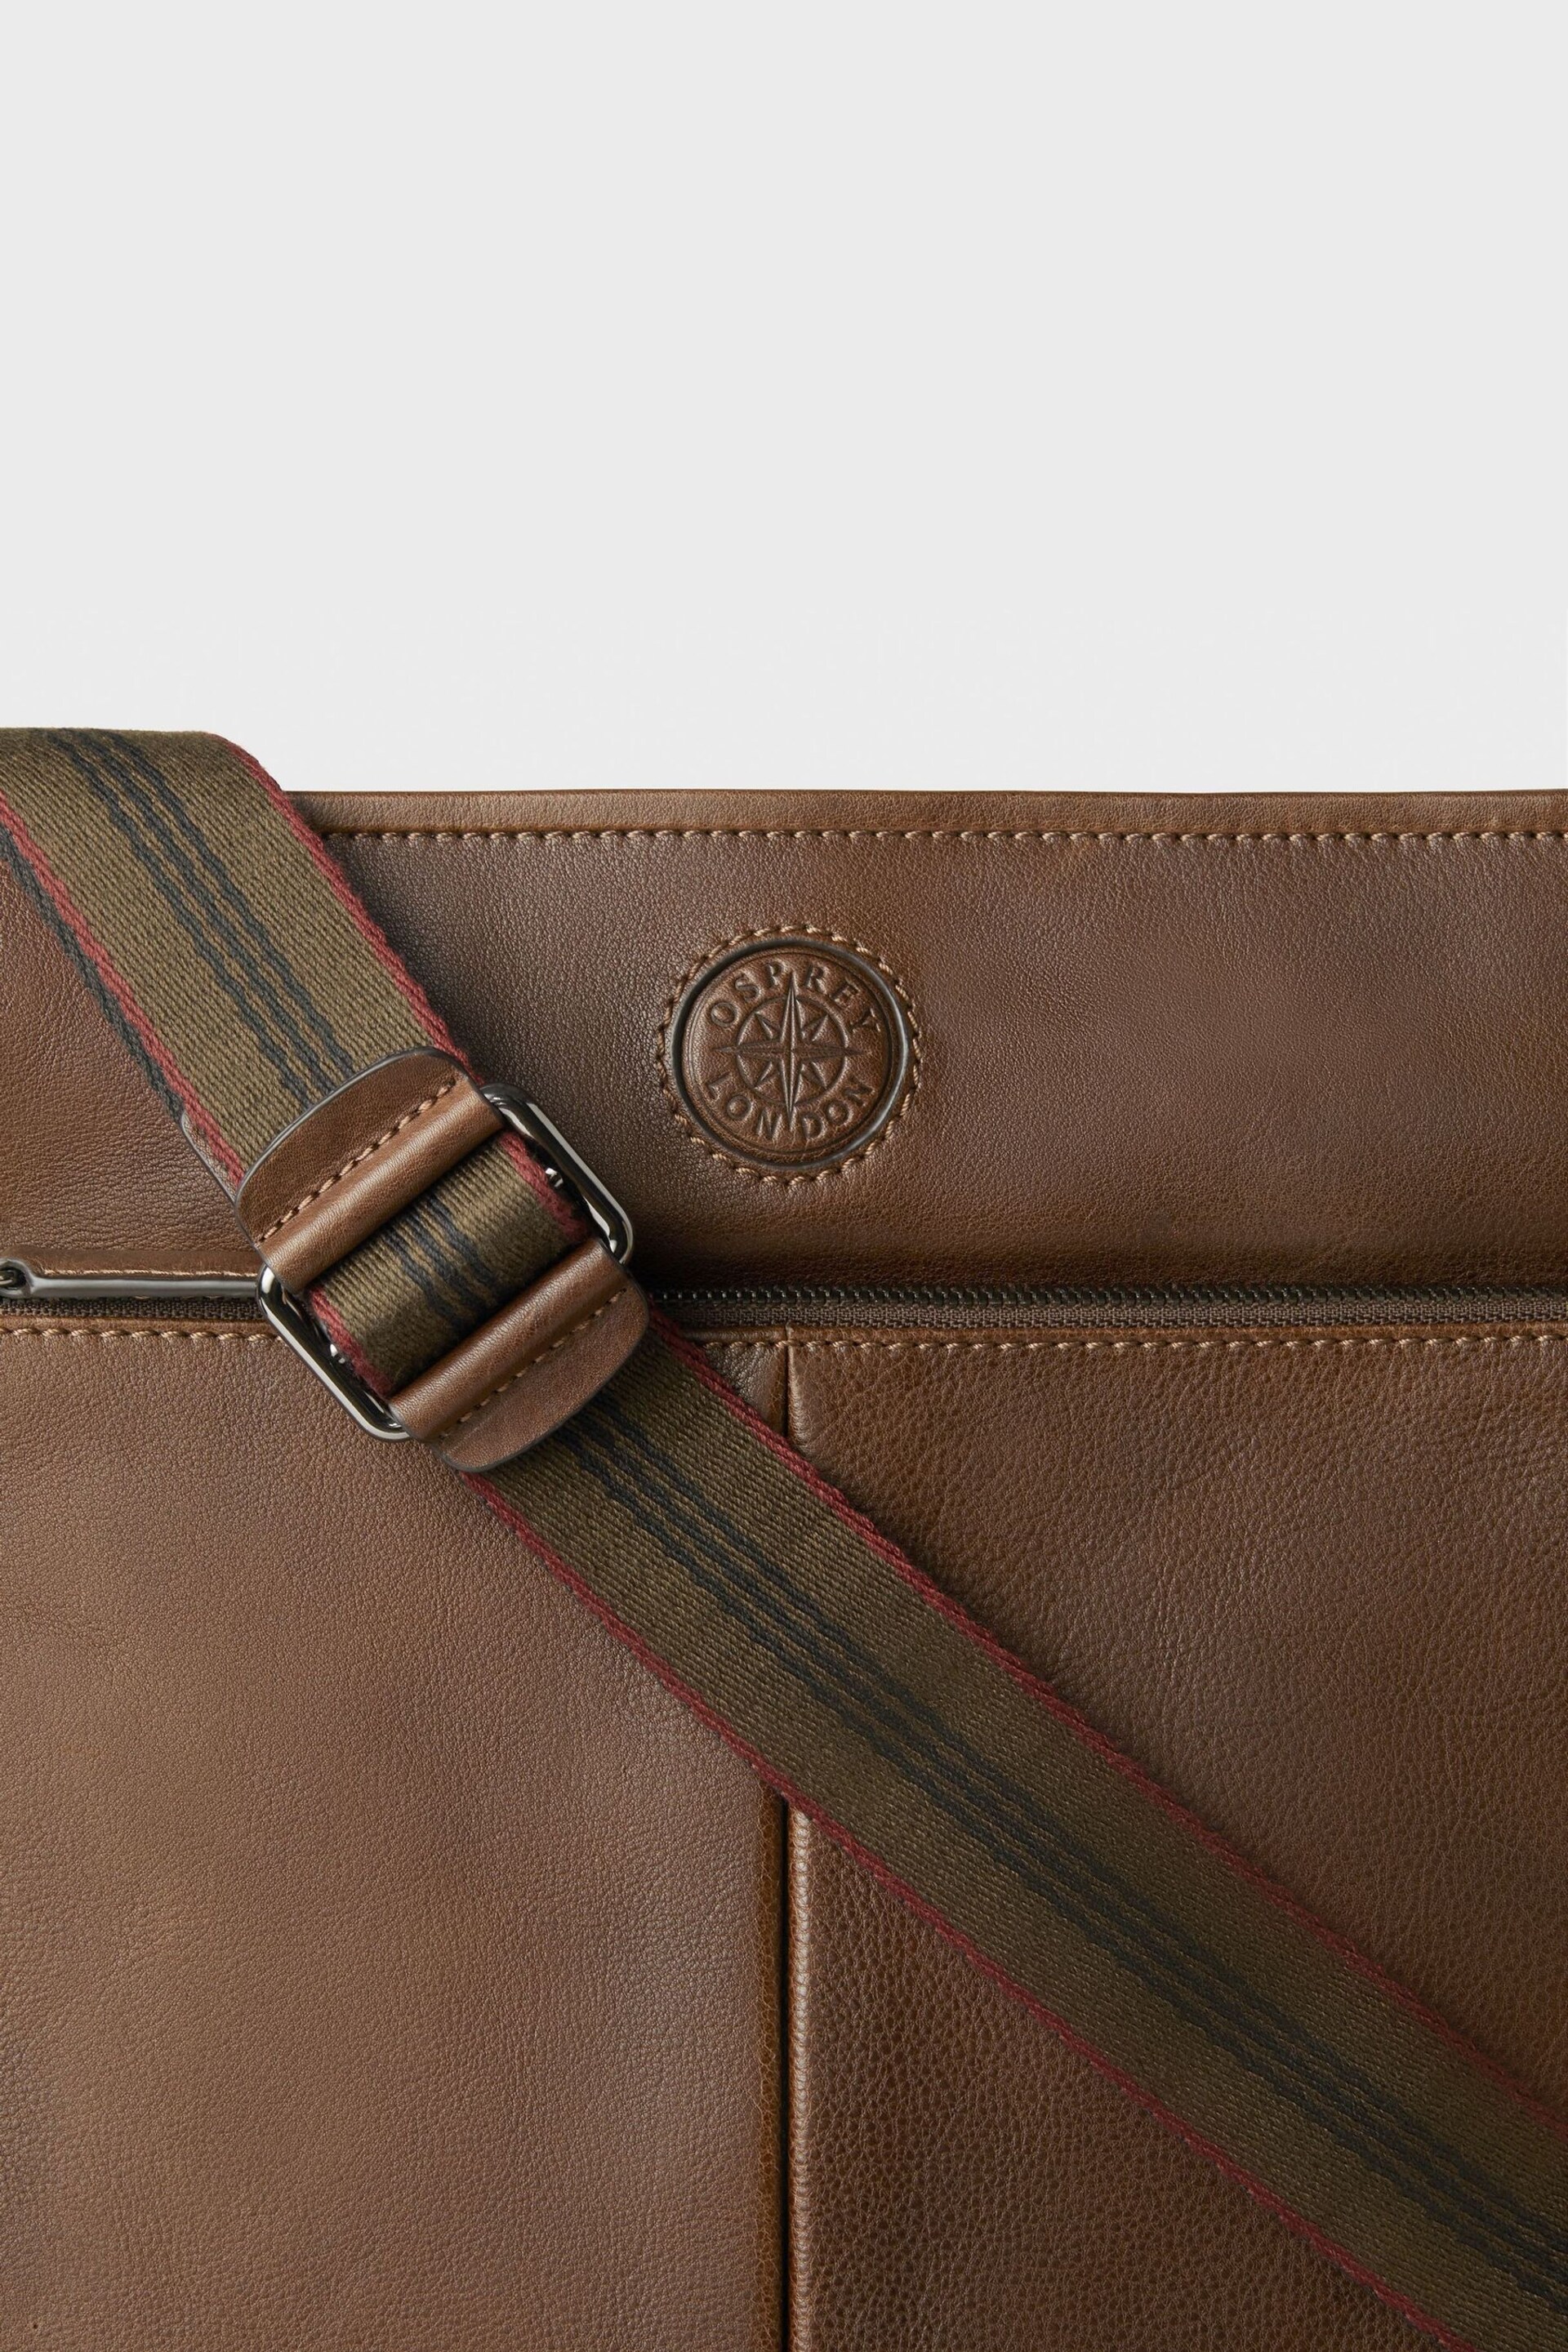 Osprey London The Compass Leather Cross-Body Brown Bag - Image 5 of 5